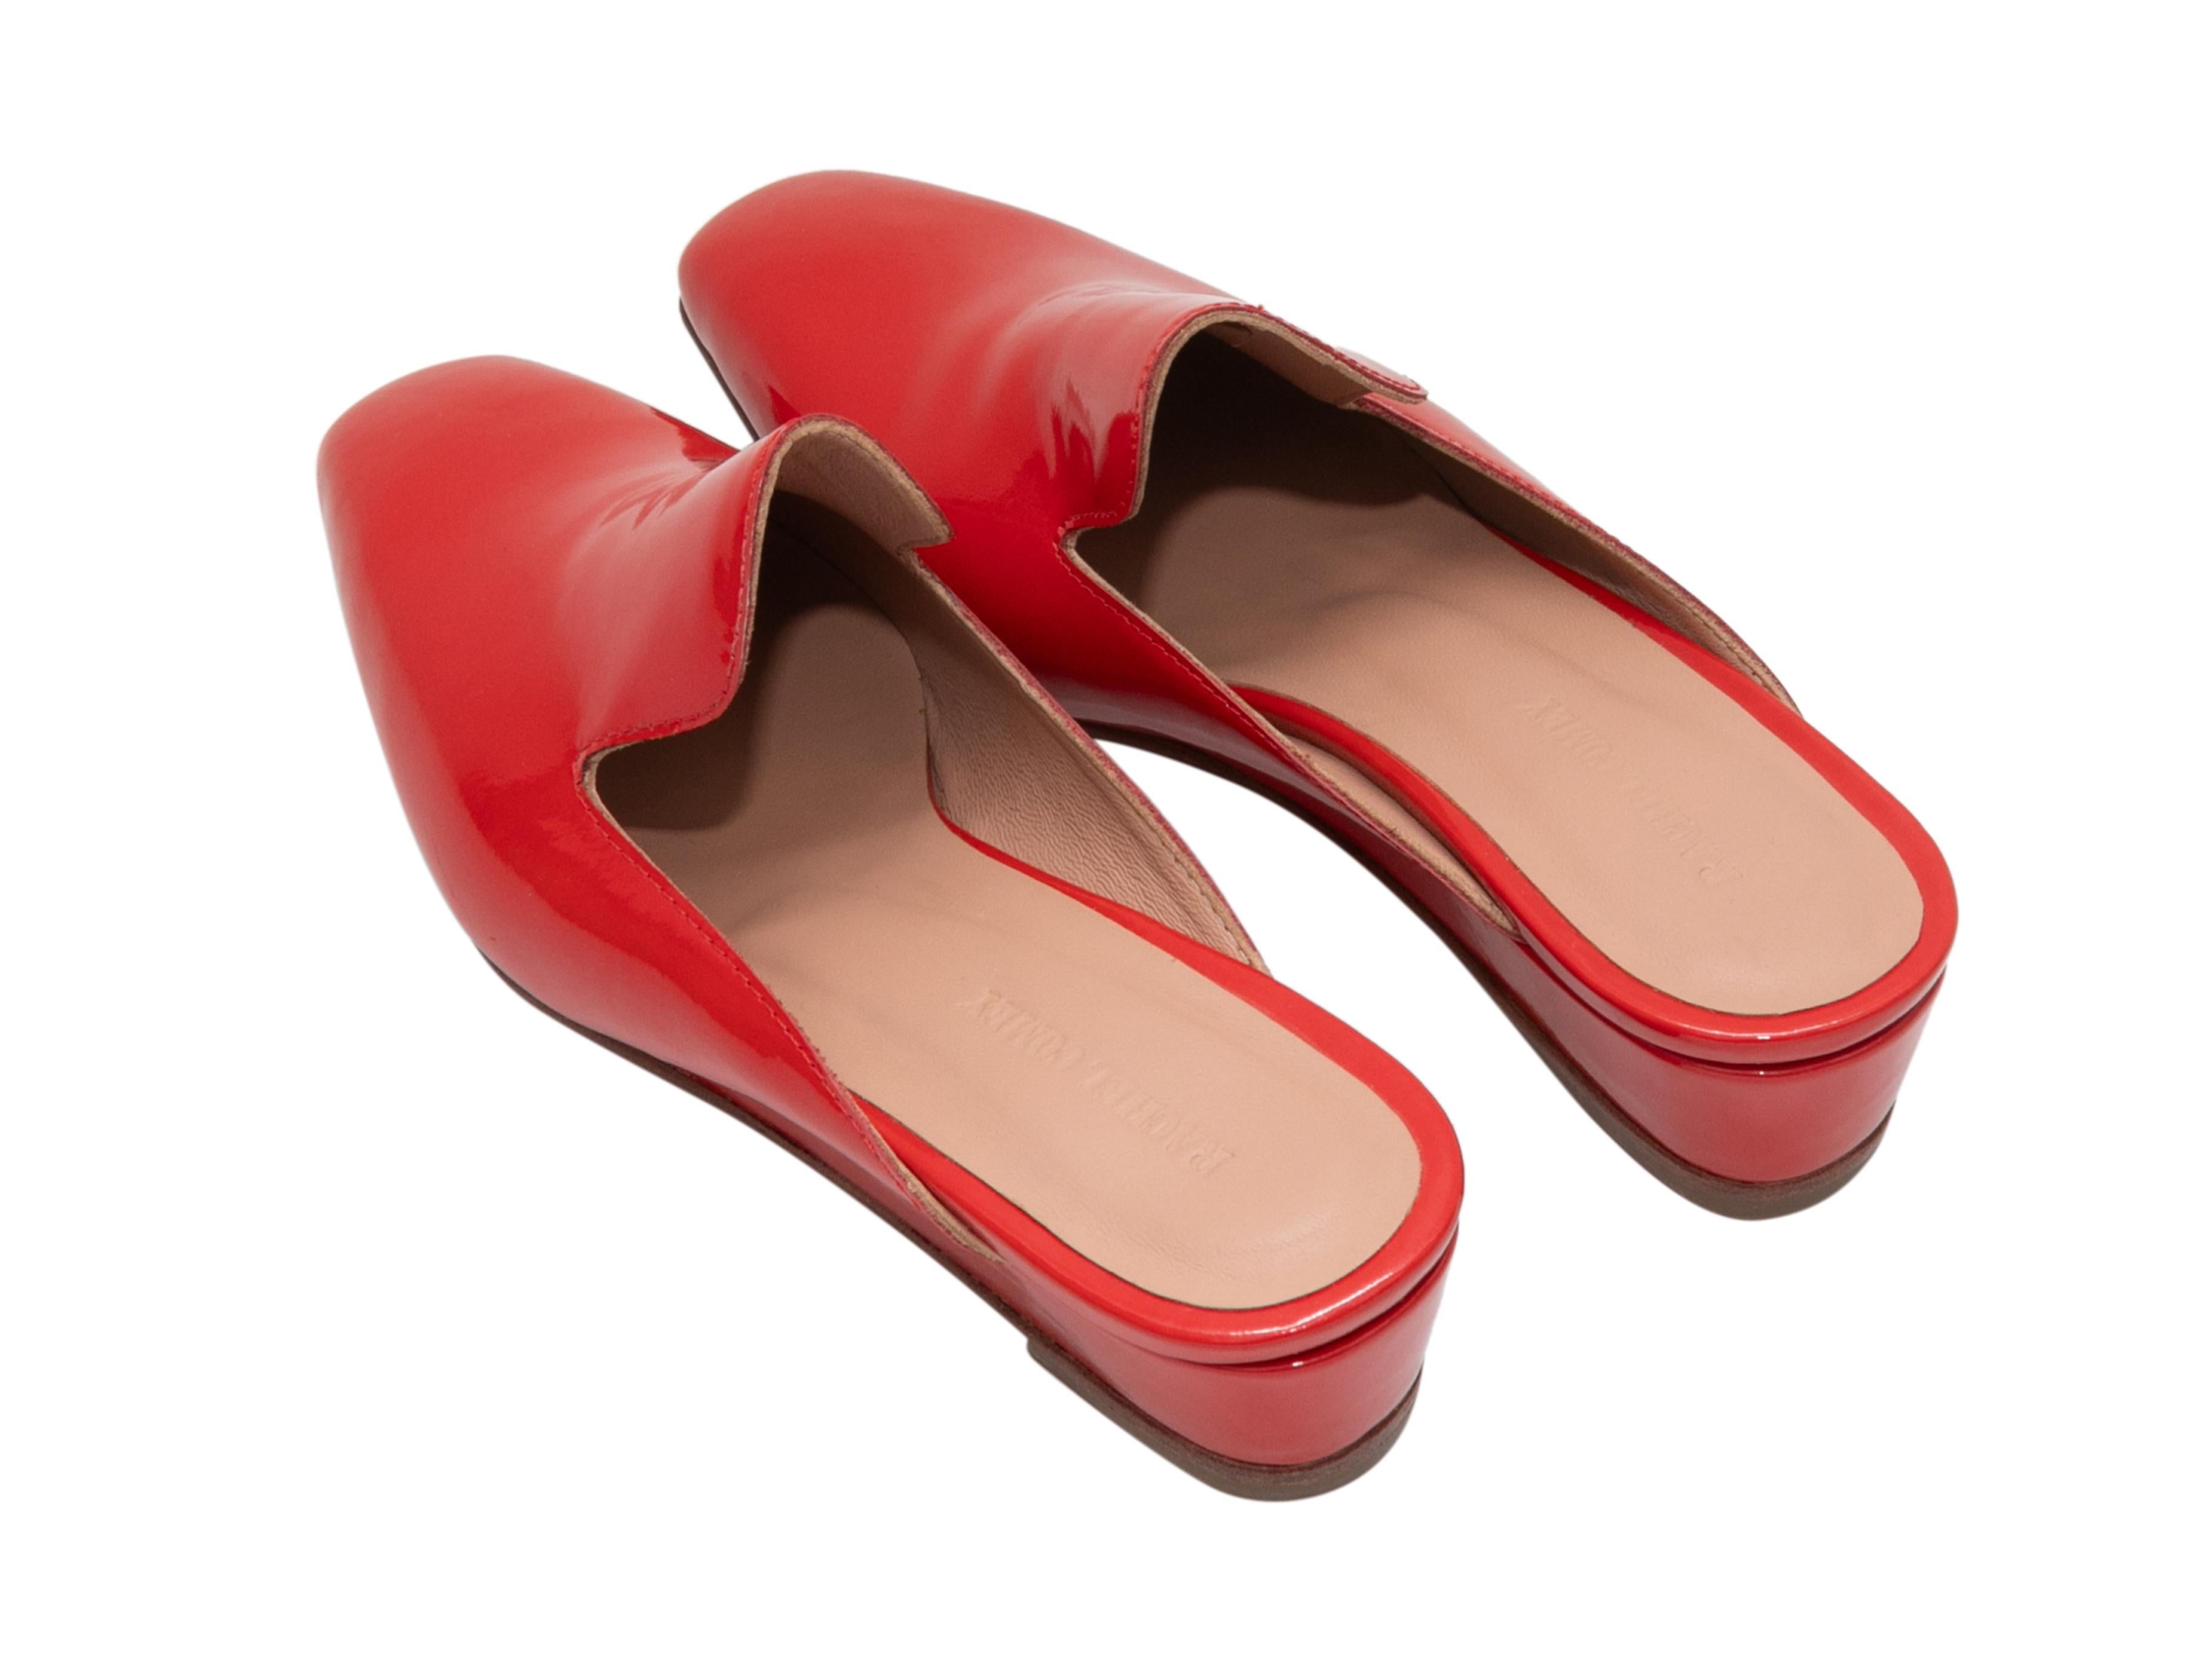 Women's Red Rachel Comey Patent Wedge Mules Size 37